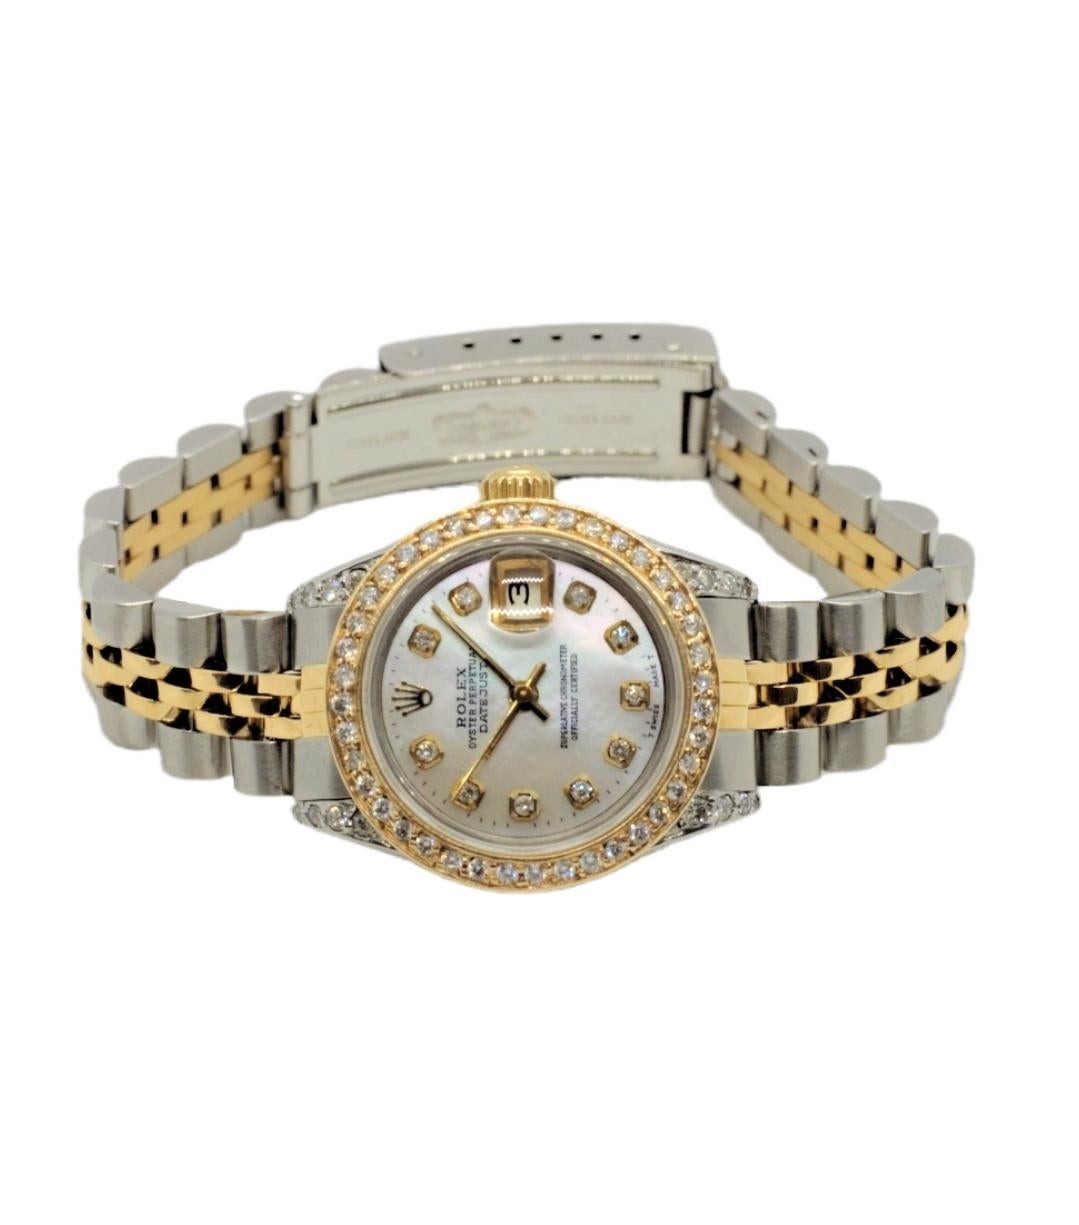 (Watch Description) 
Brand - Rolex
Gender - Ladies 
Model - 69173 Datejust
Metals - Yellow Solid Gold
Case size - 26mm
Bezel - Yellow gold Diamond
Crystal - Sapphire
Movement - Automatic Cal.2135
Dial - Refinished Red Diamond
Wrist band - Two Tone